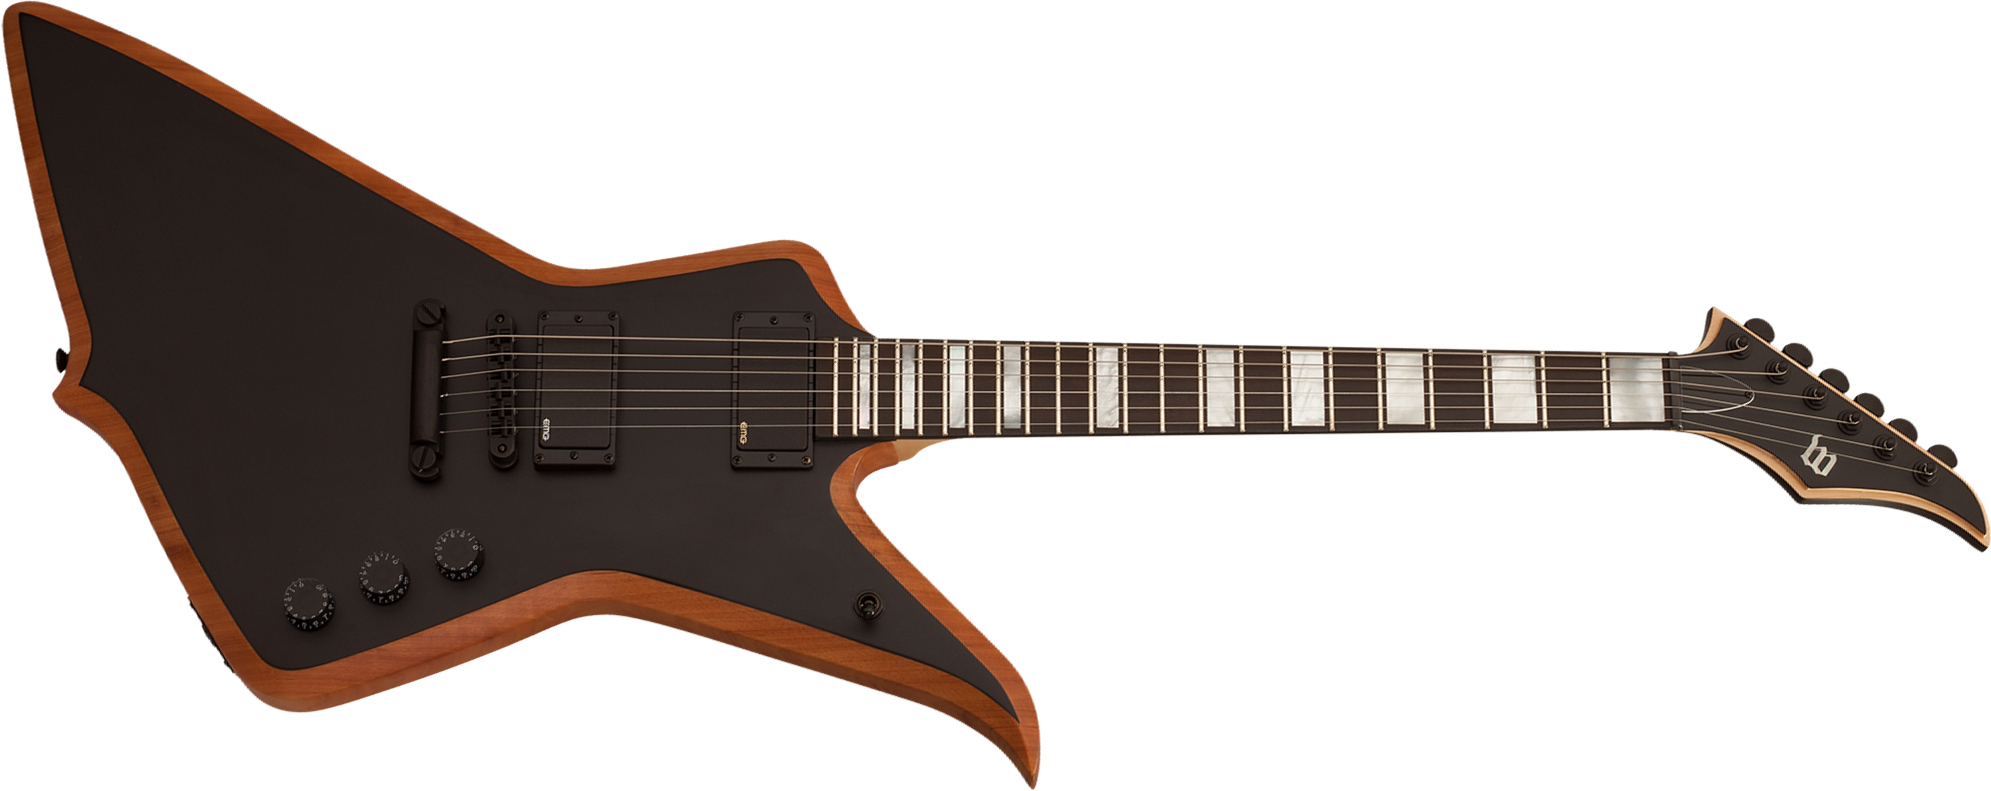 Wylde Audio Blood Eagle Hh Ht Eb - Mahogany Blackout - Metal electric guitar - Main picture